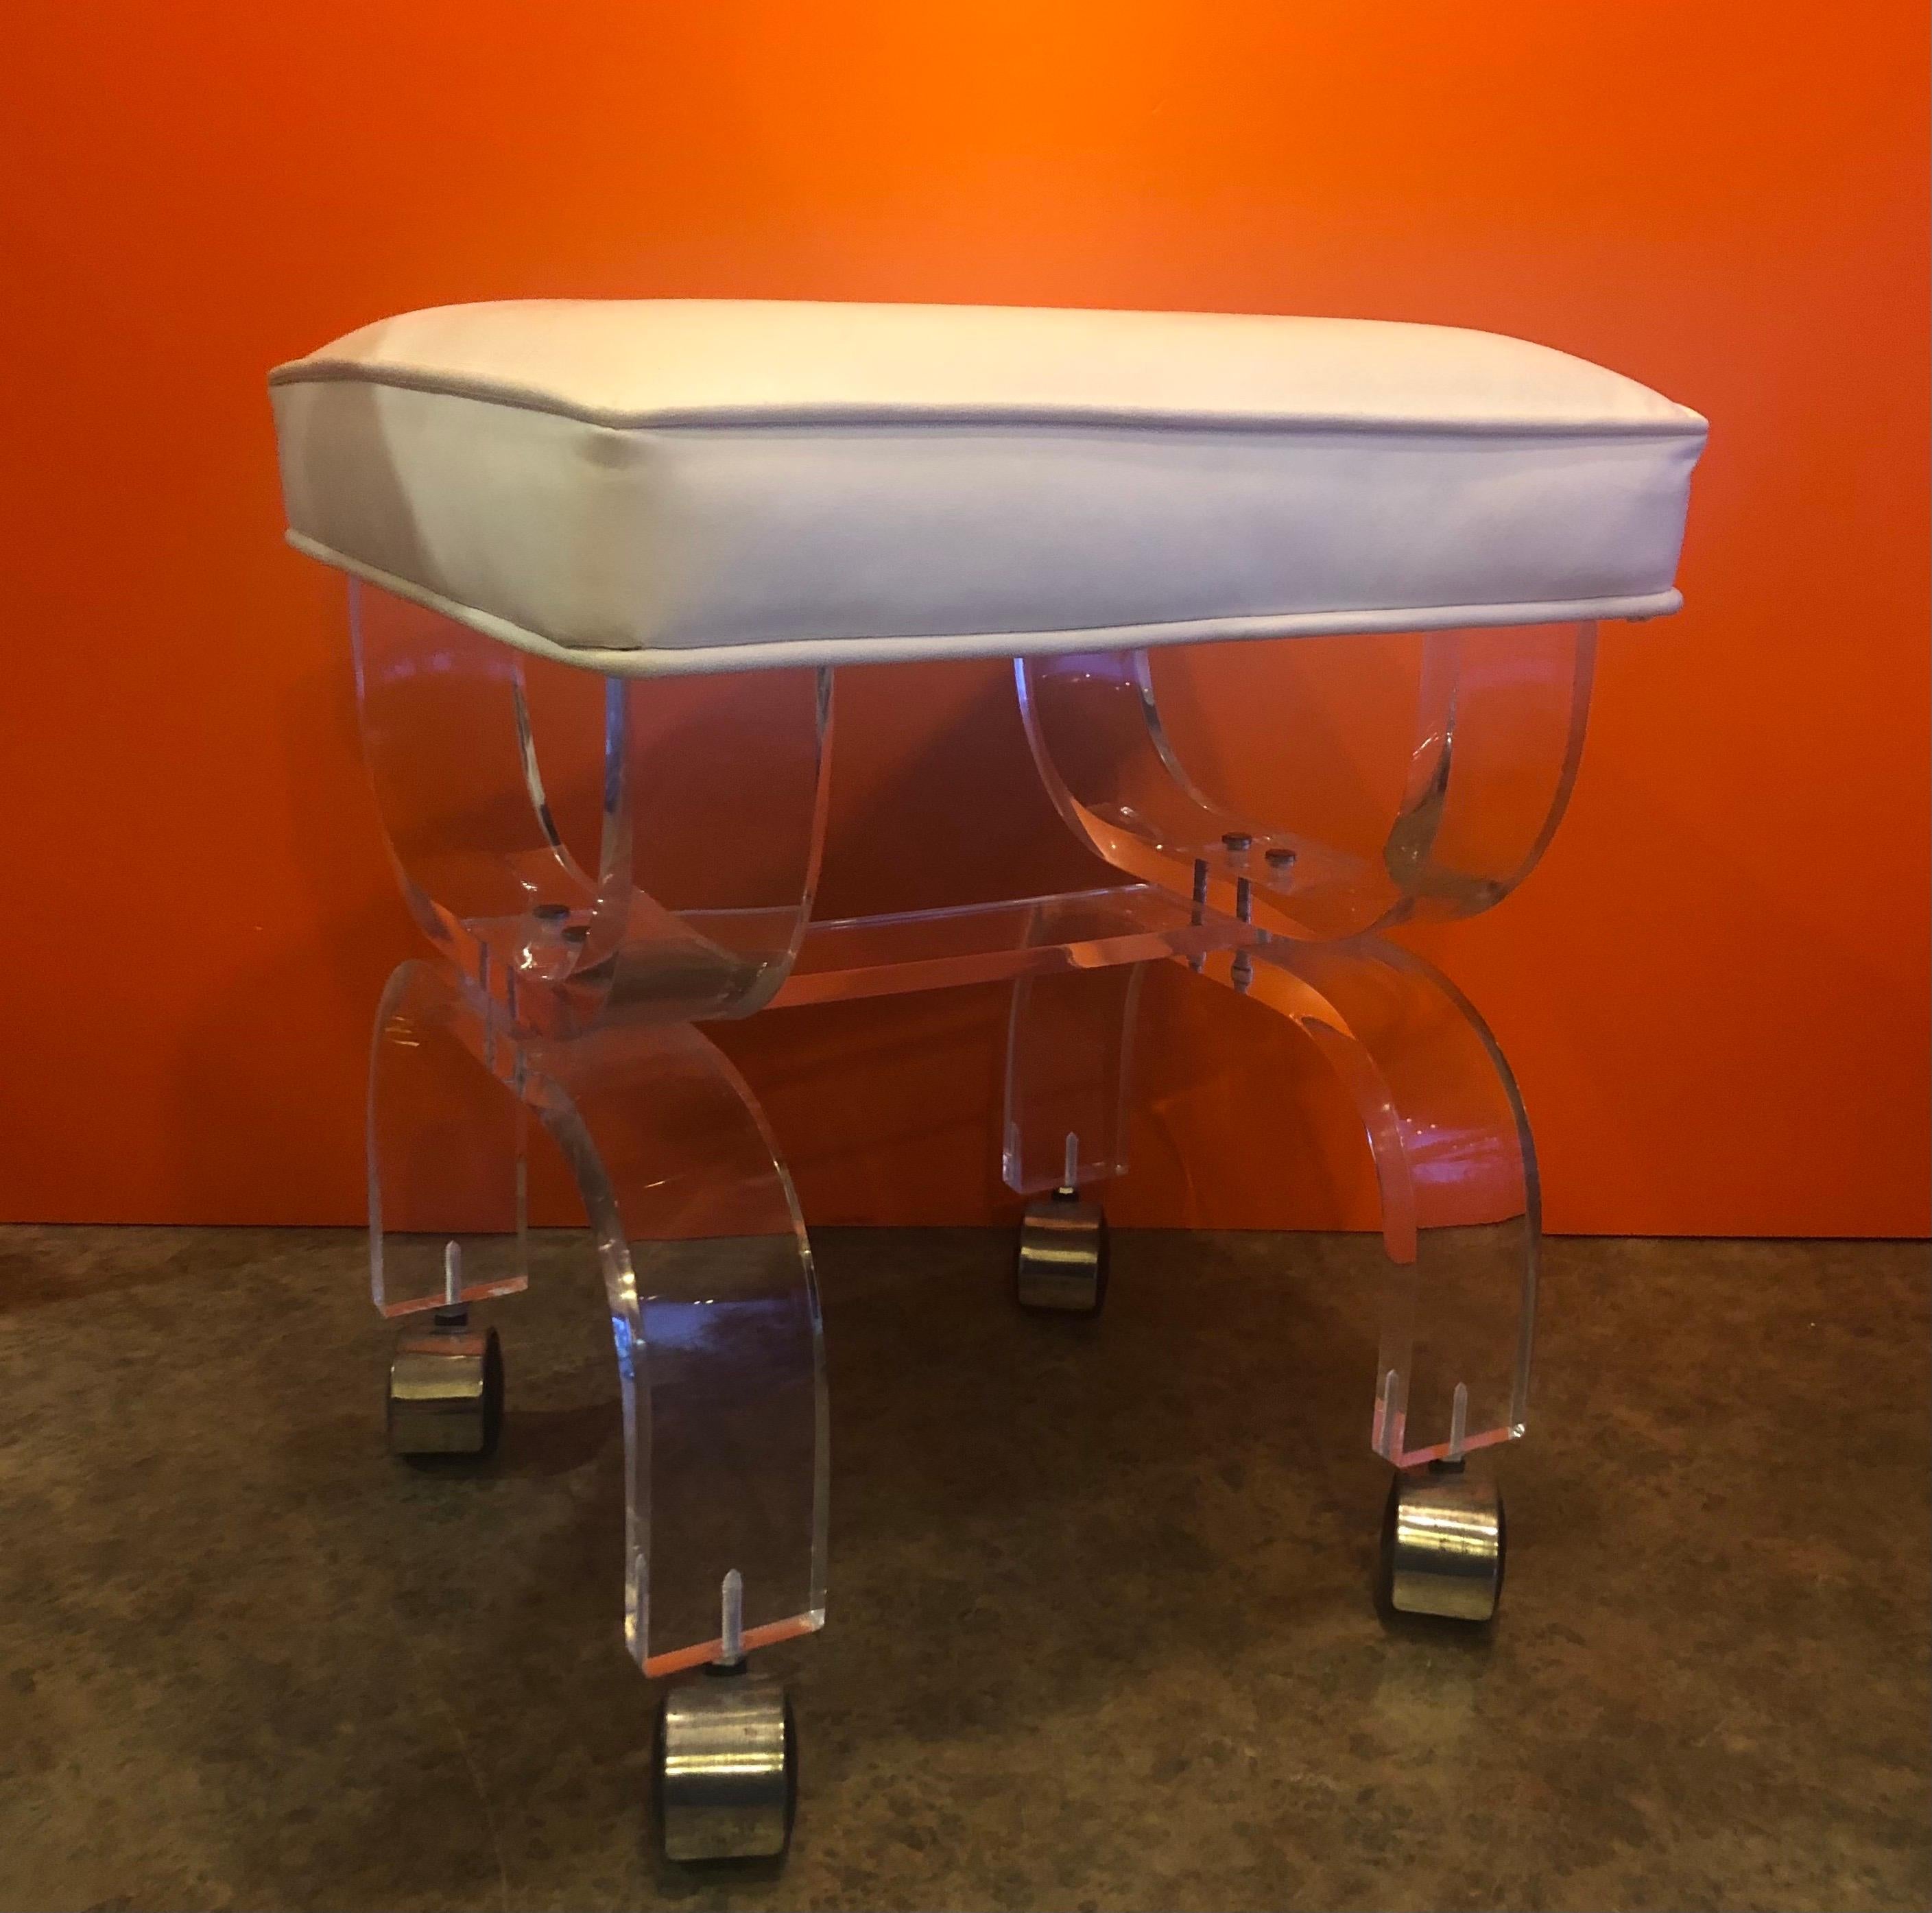 Midcentury Lucite vanity stool or bench with white naughahyde seat, circa 1970s. The bench is on casters and is in good vintage condition; very solid and stabile. #1393.